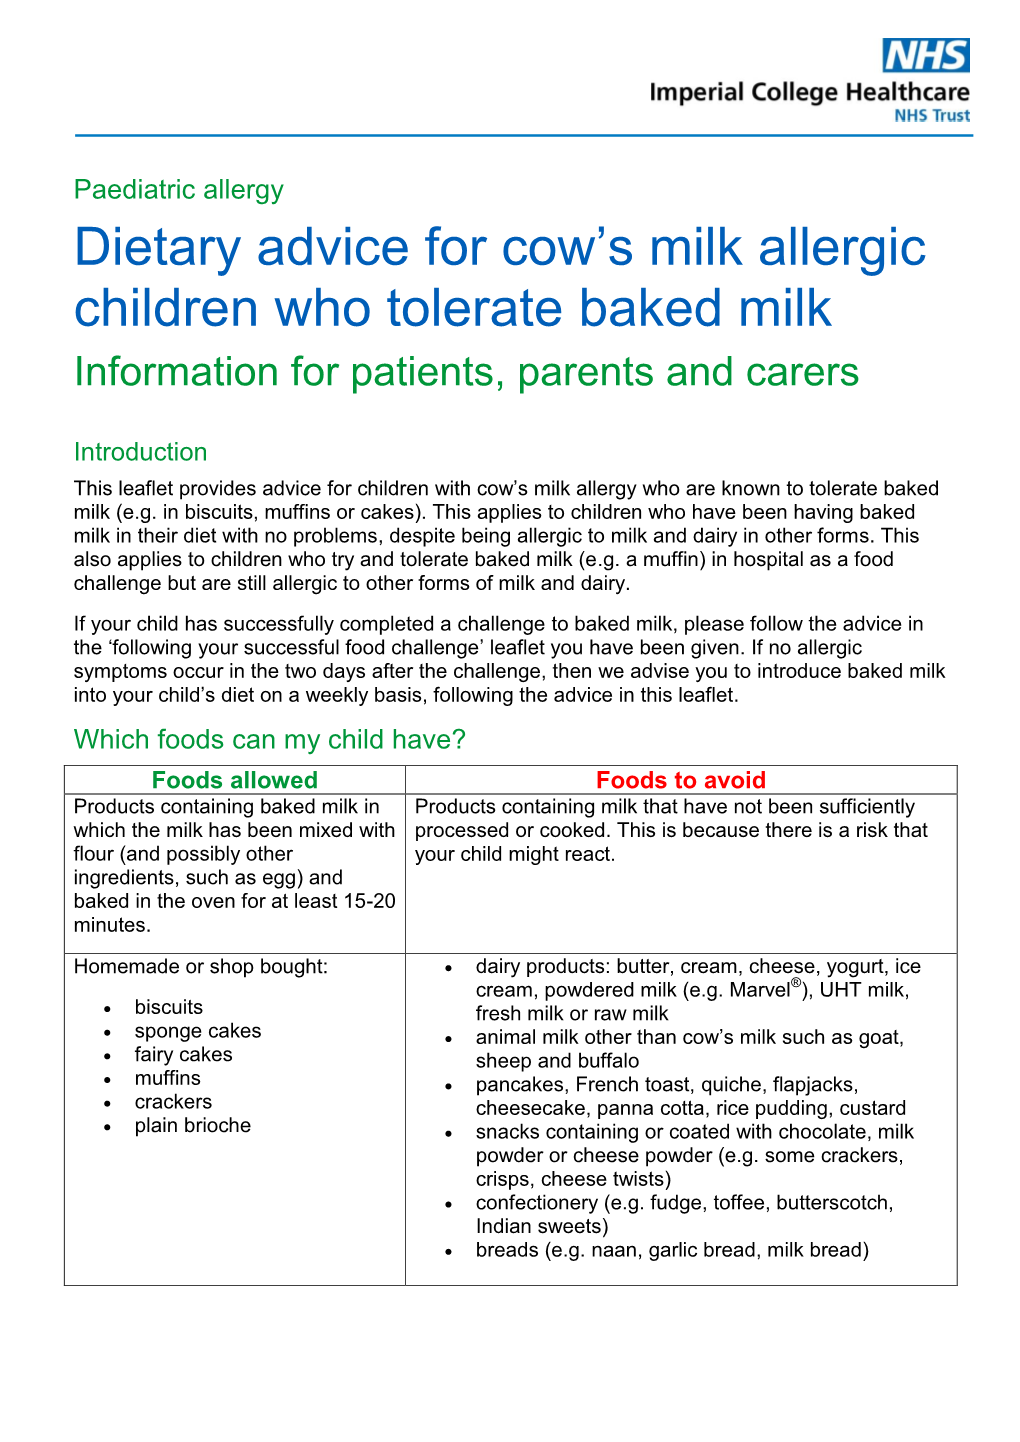 Dietary Advice for Cow's Milk Allergic Children Who Tolerate Baked Milk